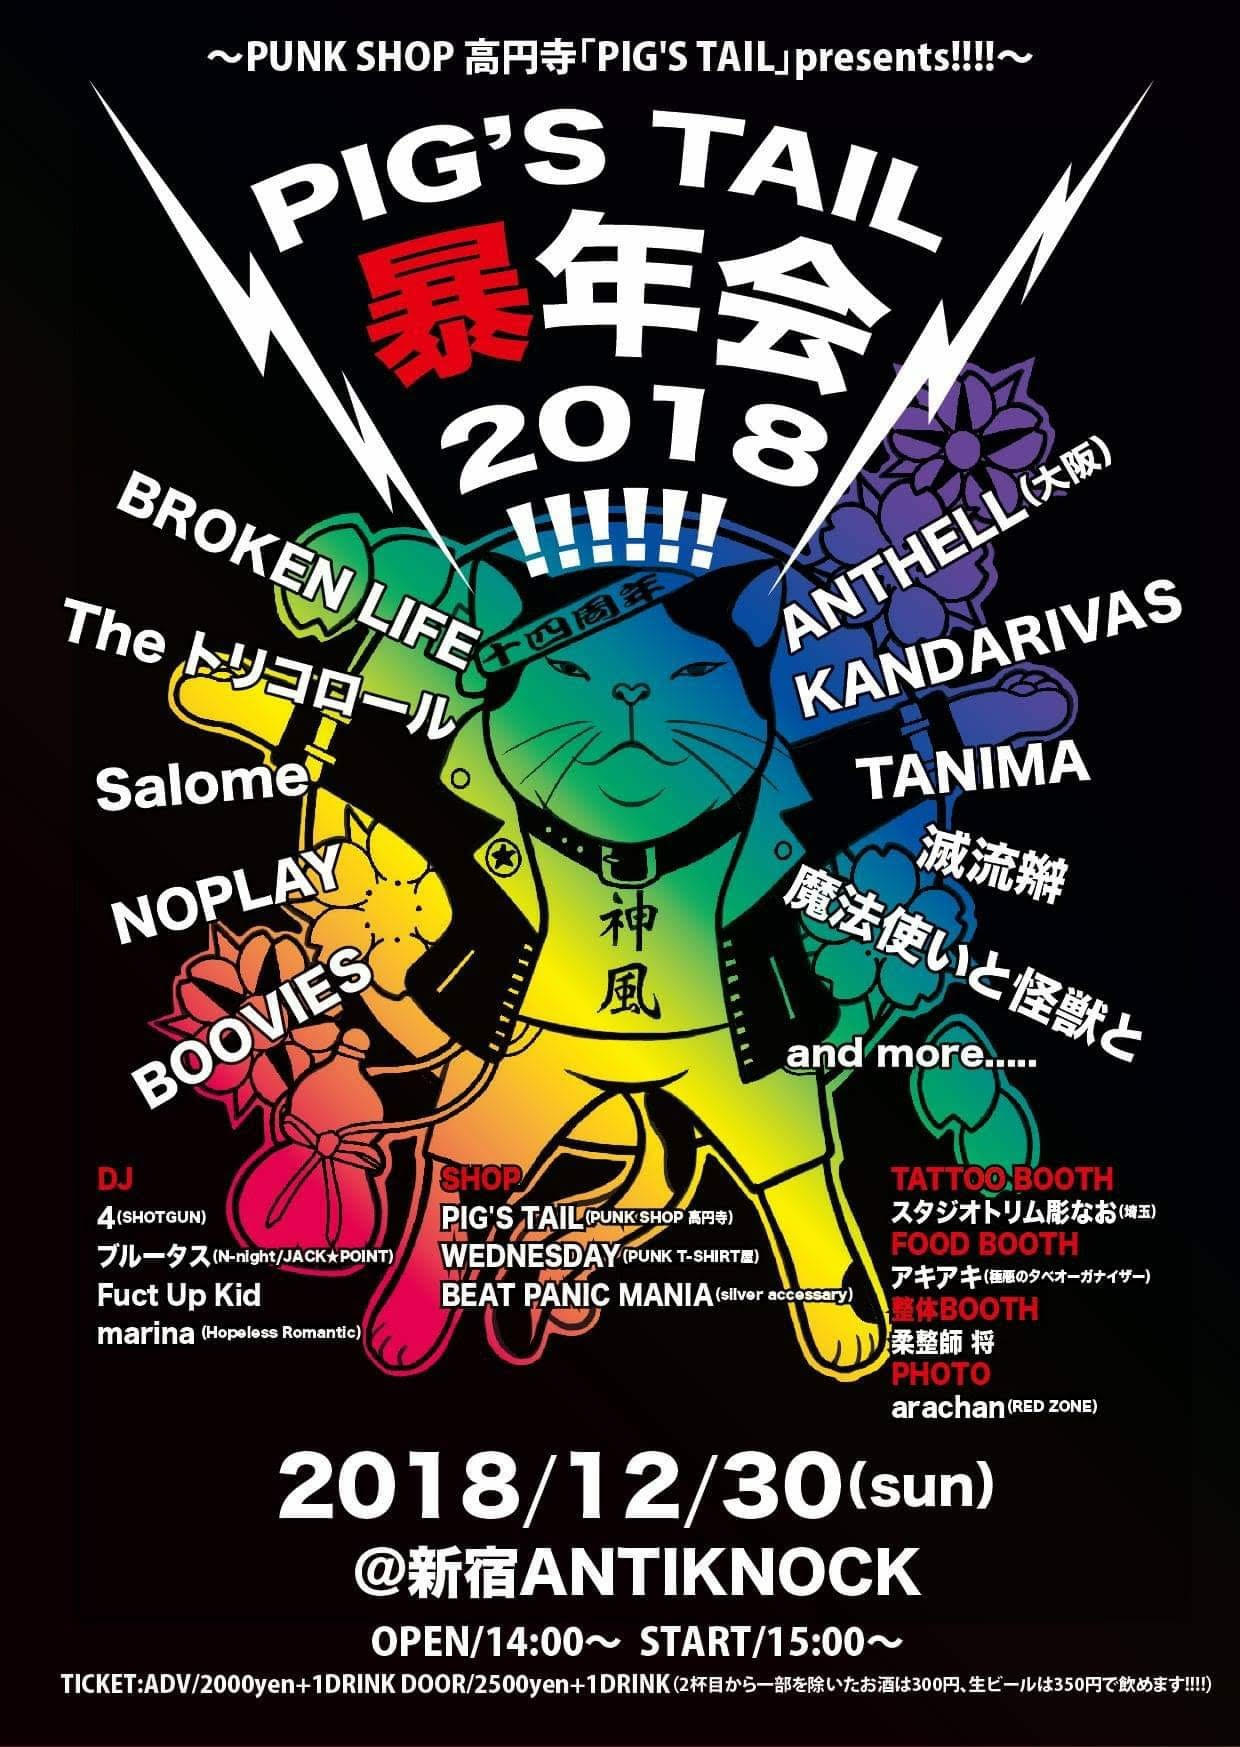 PUNK SHOP「PIG'S TAIL」presents!!!! 【PIG'S TAIL 暴年会 2018!!!!!!】